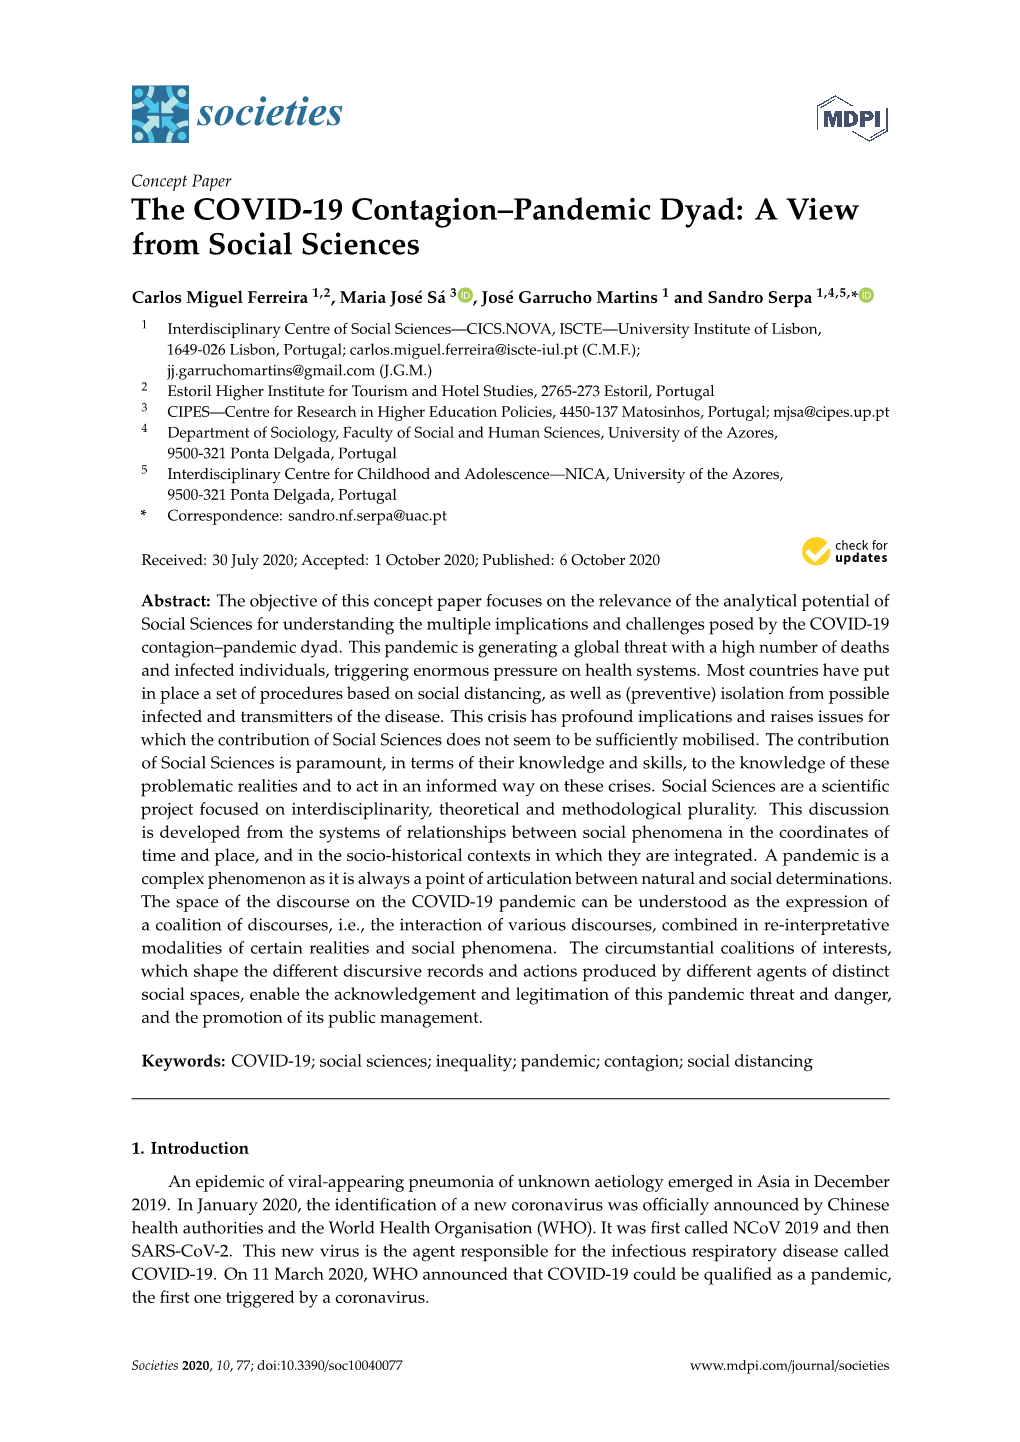 The COVID-19 Contagion–Pandemic Dyad: a View from Social Sciences